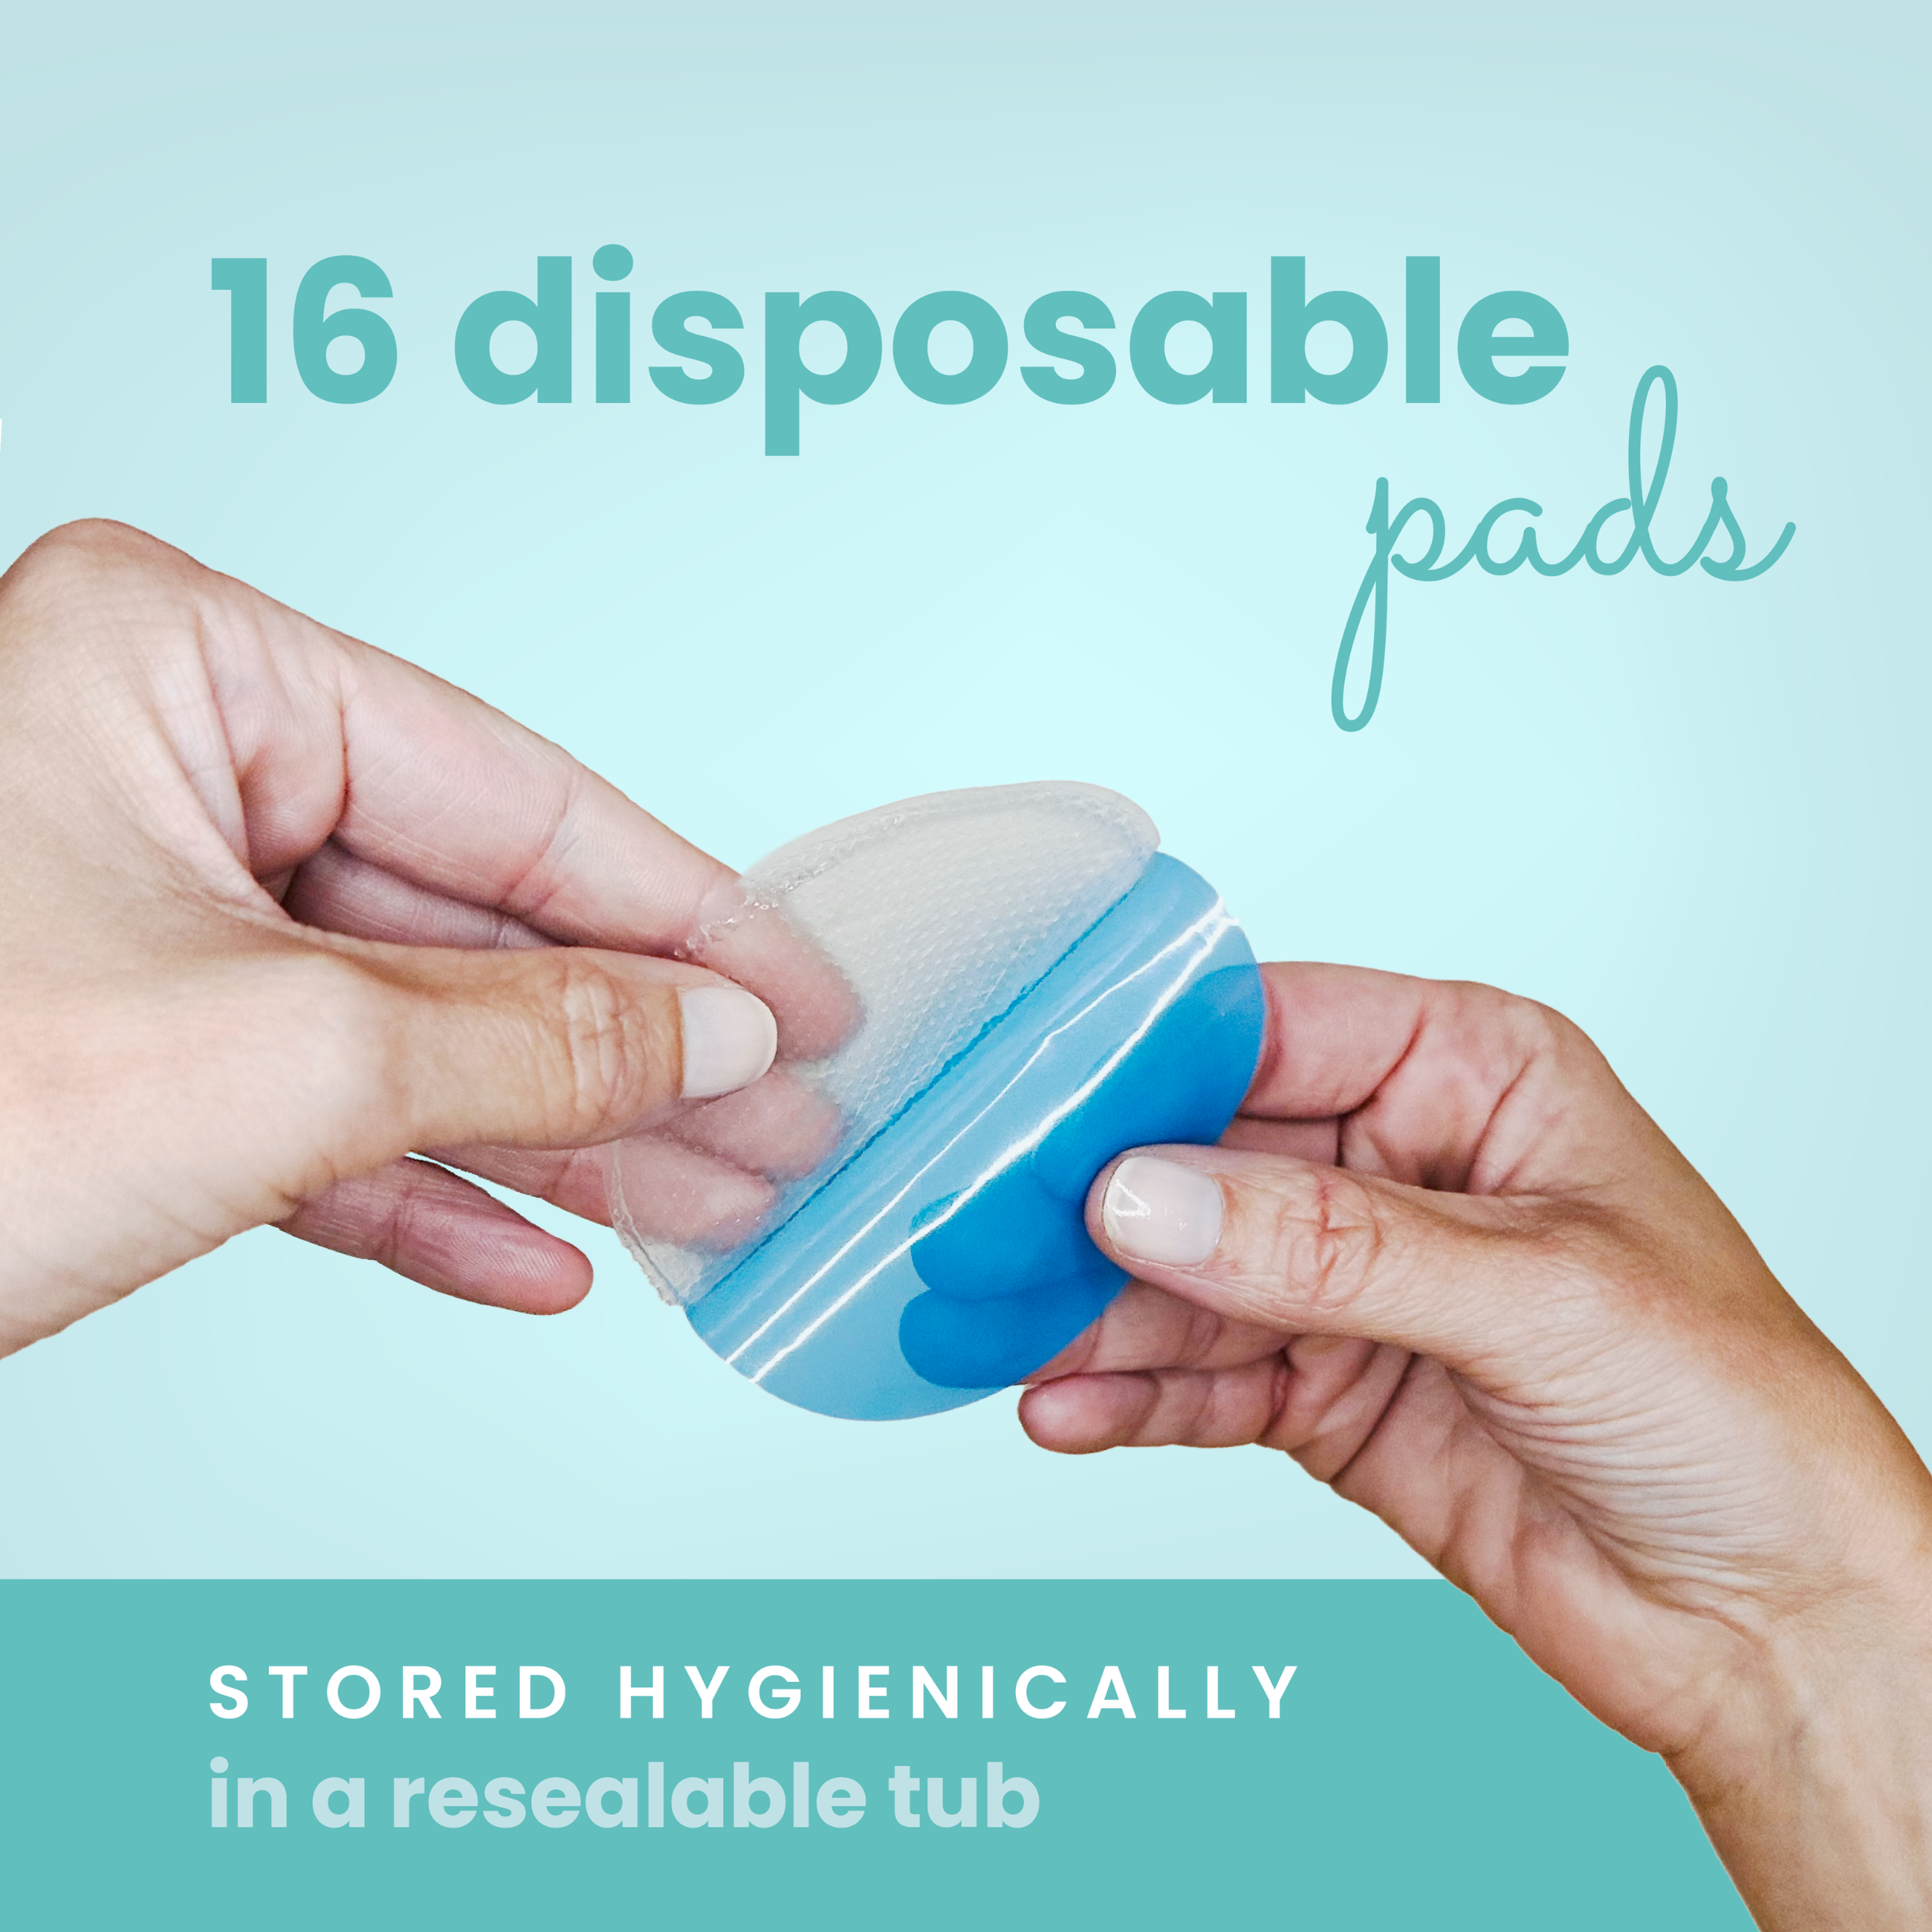  [8 Pads] Hydrogel Pads for Breastfeeding Soreness